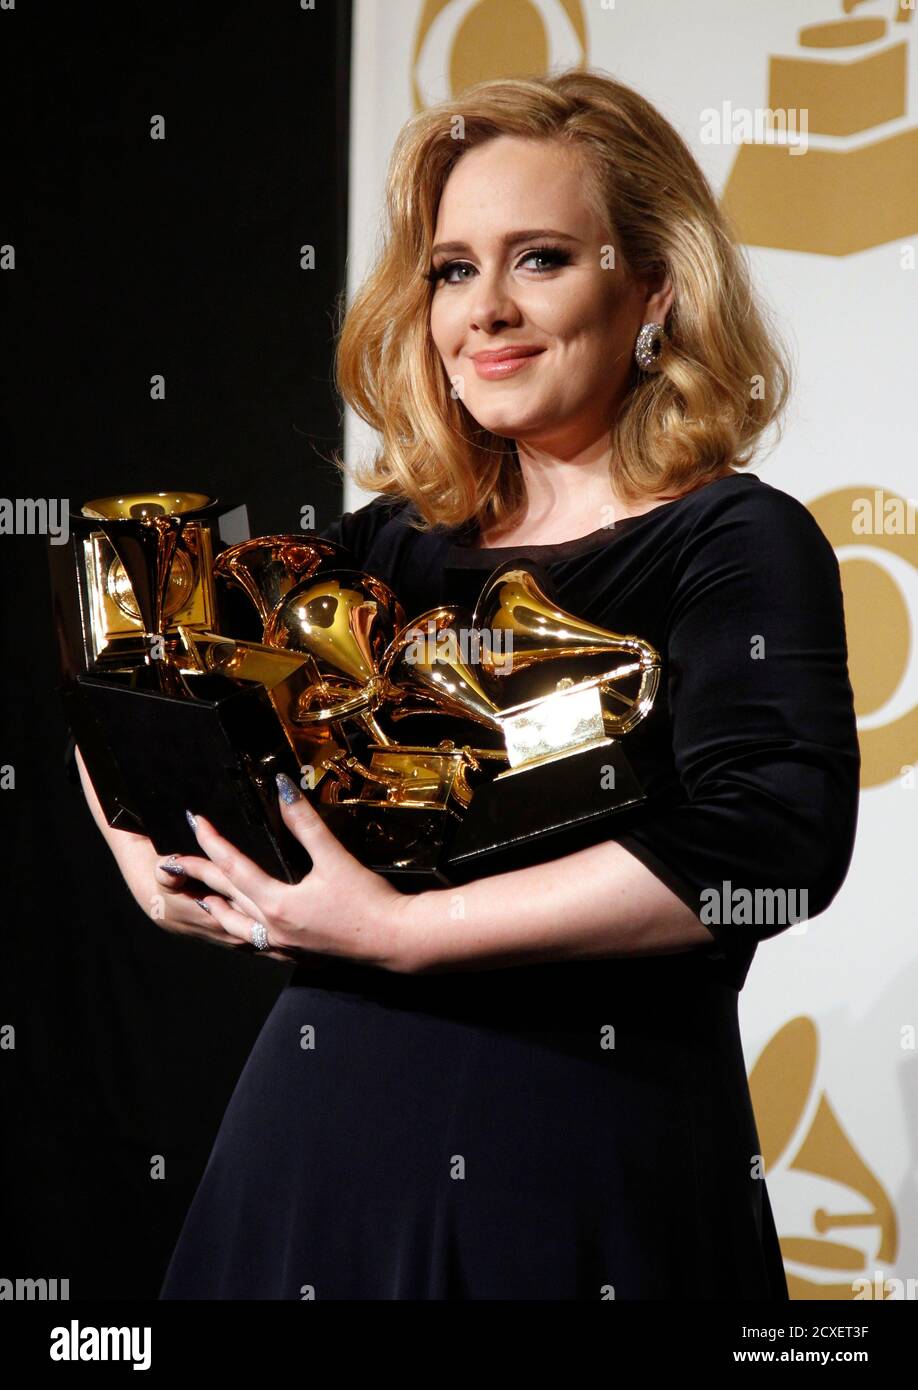 Singer Adele holds her six Grammy Awards at the 54th annual Grammy Awards  in Los Angeles, California February 12, 2012. Soul singer Adele triumphed  in her return to music's stage on Sunday,